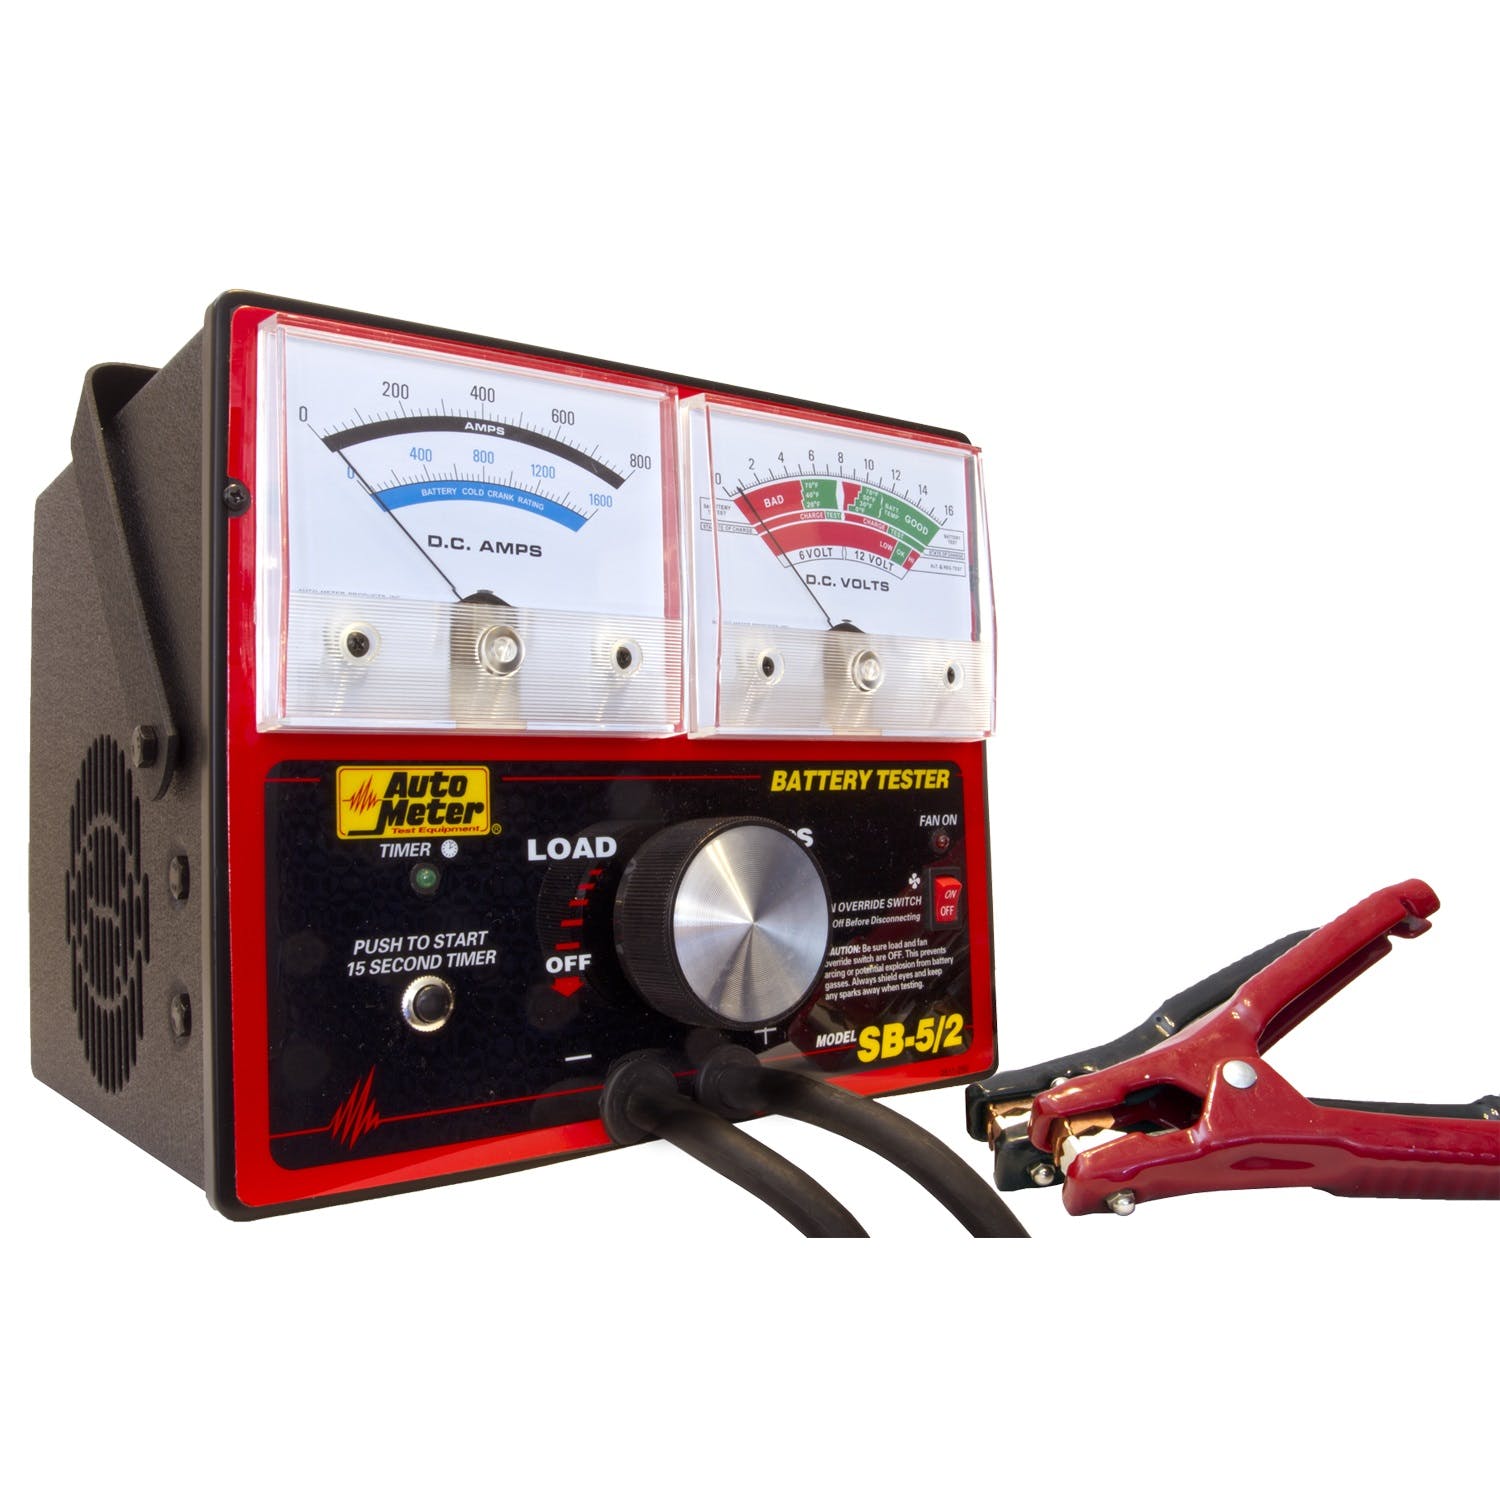 AutoMeter Products SB-5/2 Battery Tester